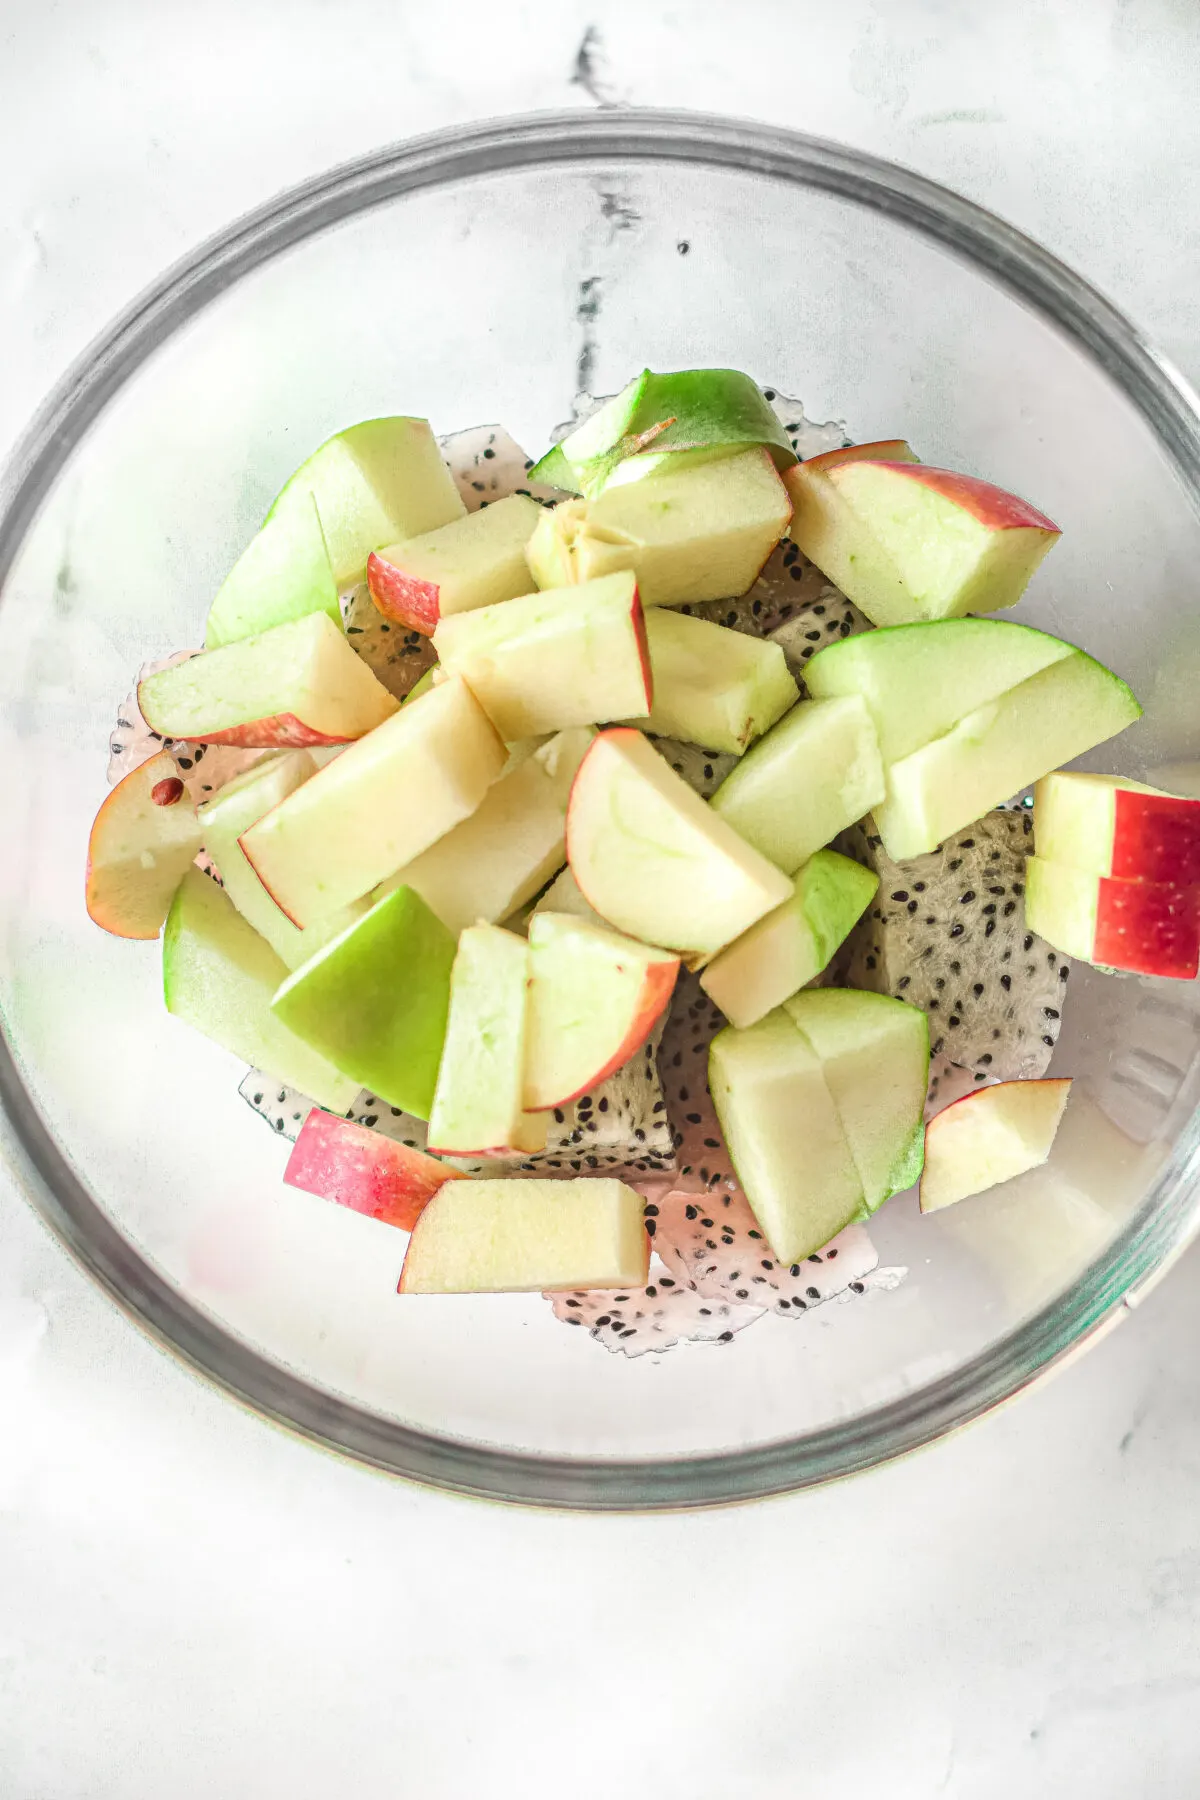 Place the cubed dragon fruit, red apple, and green apple into a large bowl.